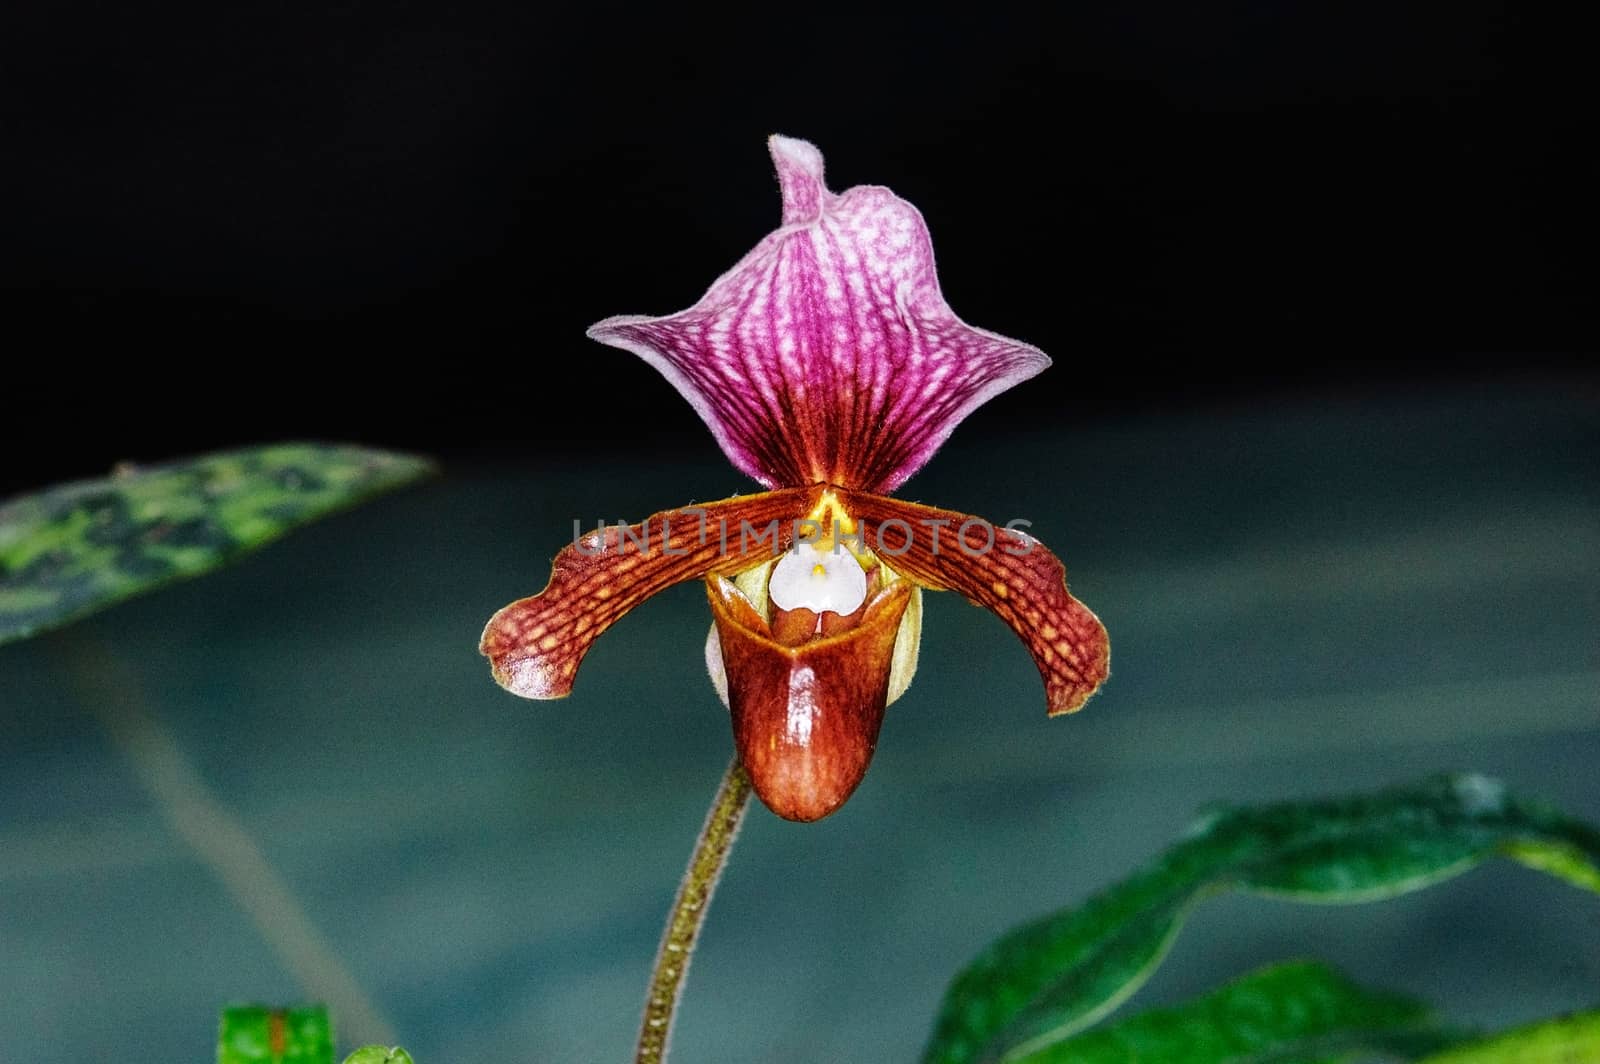 A beautiful paphiopedilum orchid flowers in garden